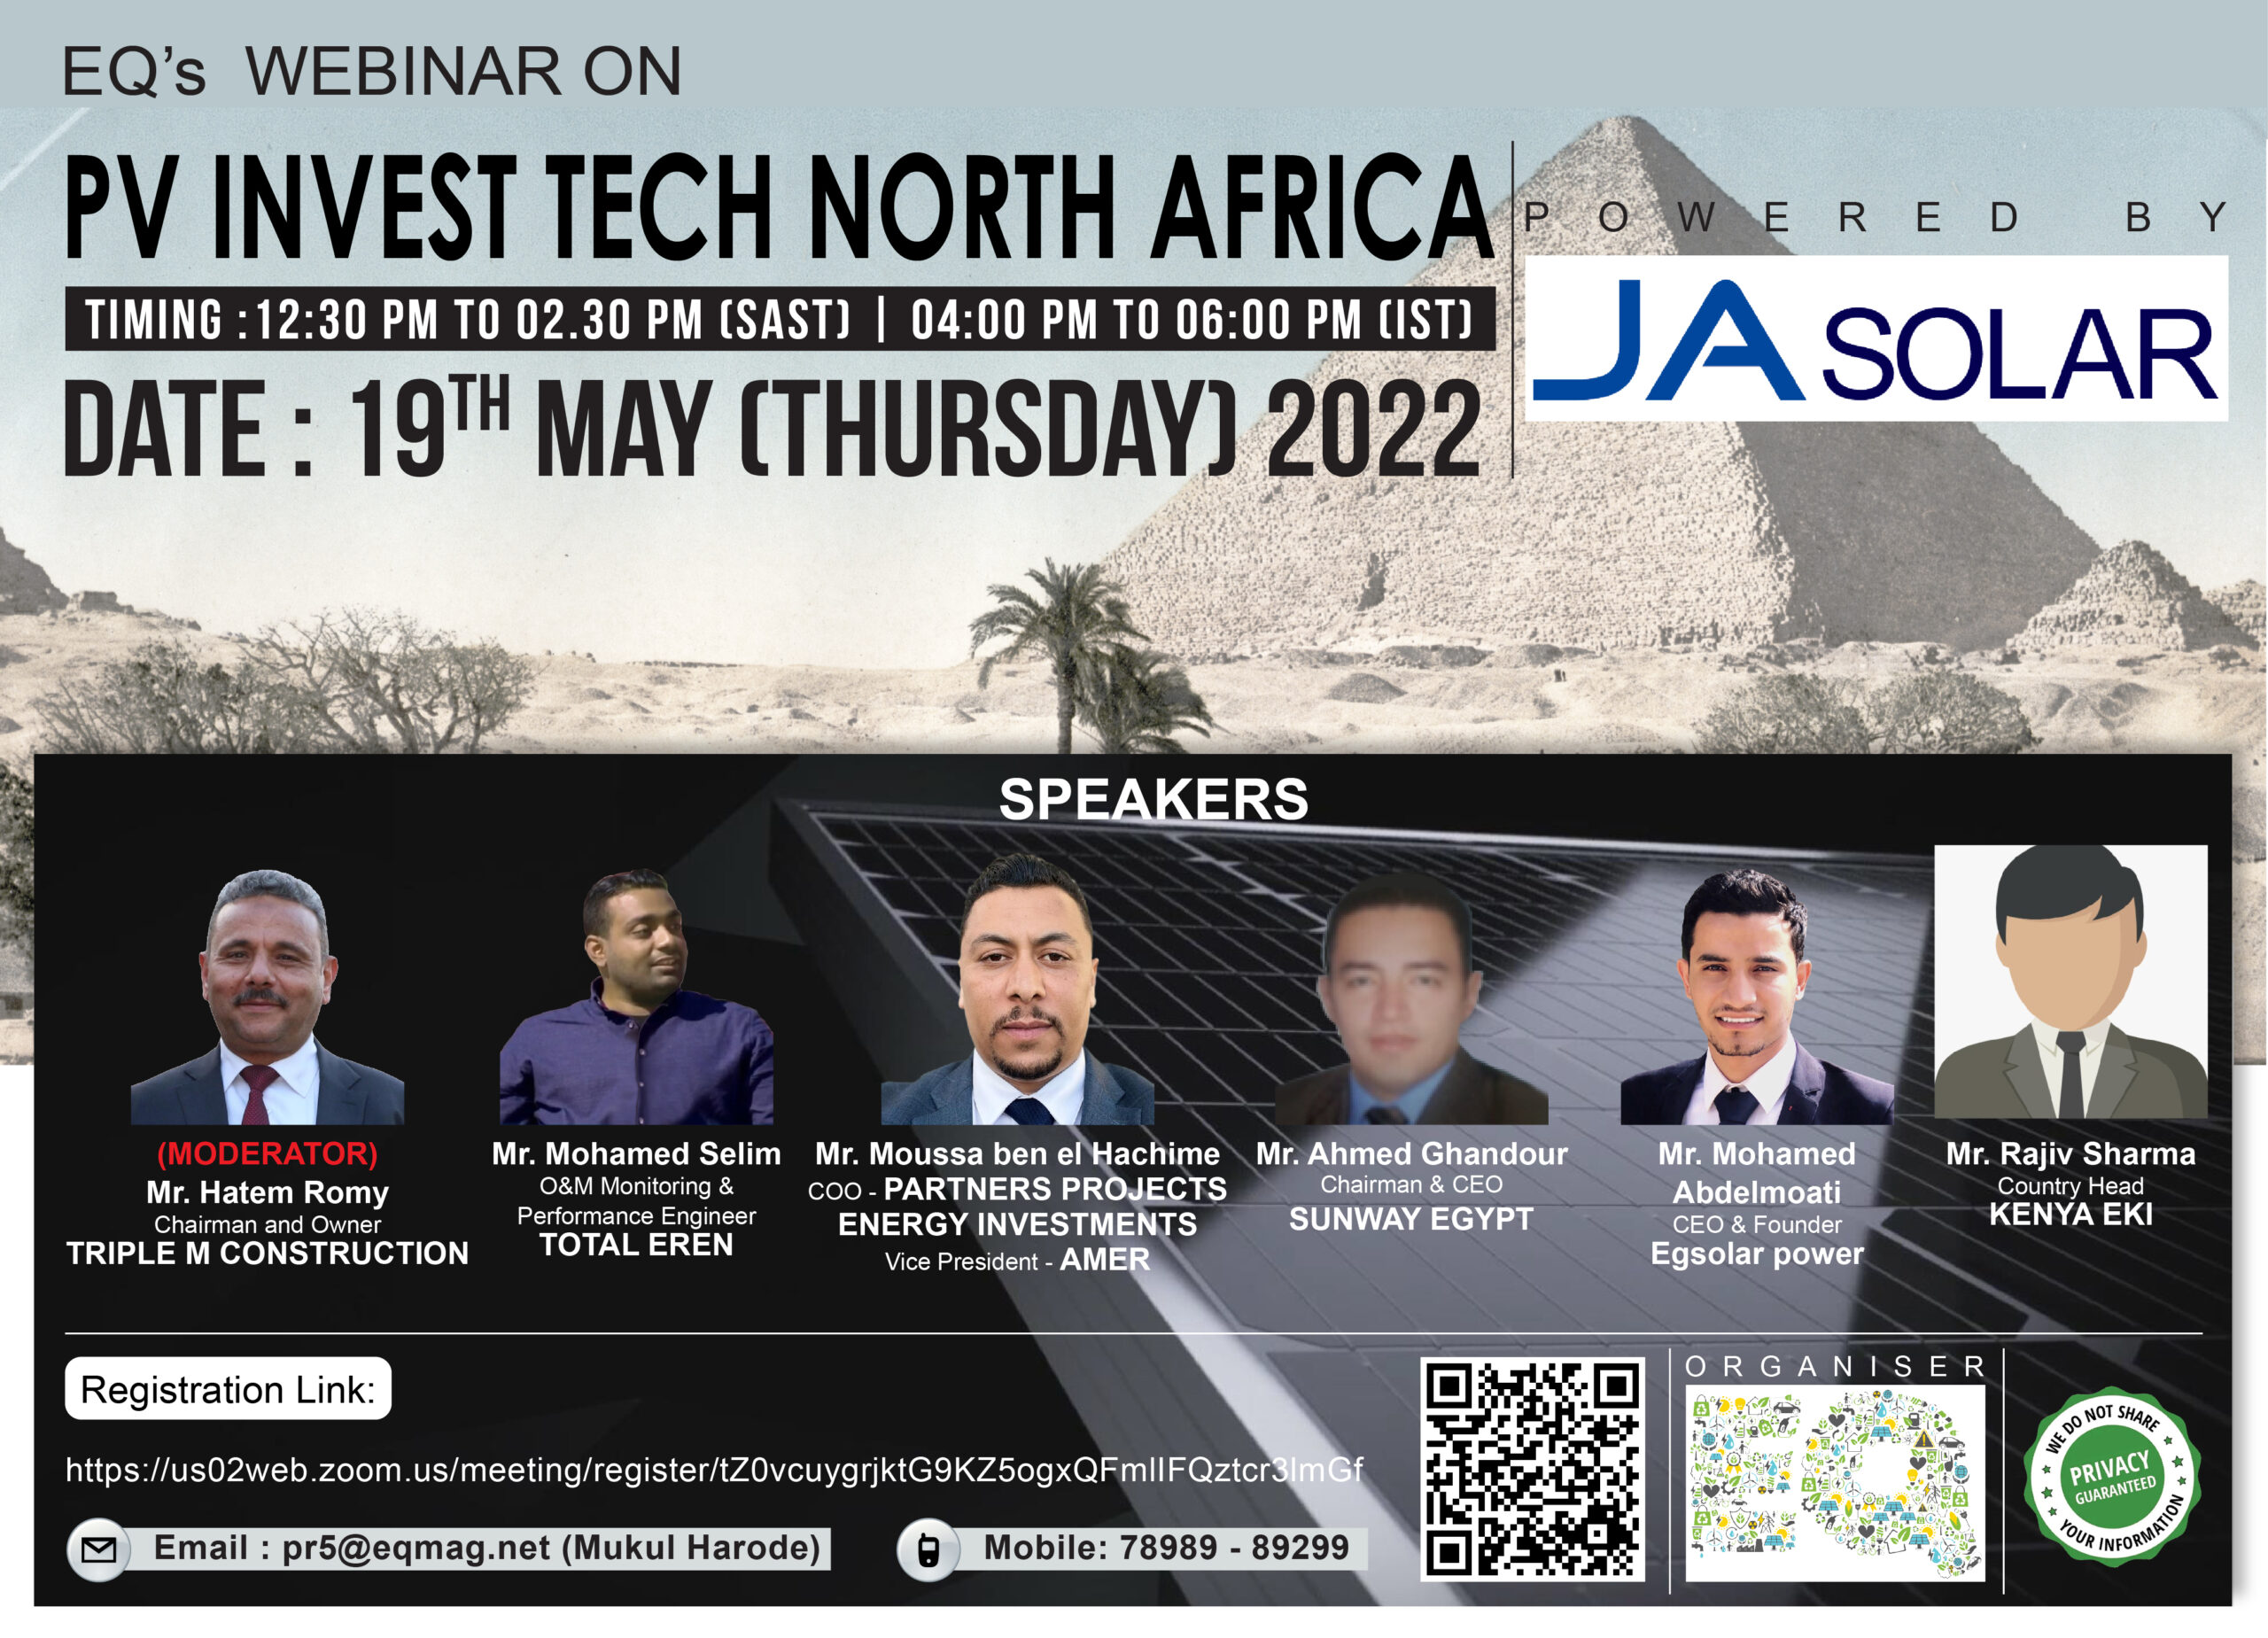 EQ Webinar on North Africa PV InvestTech Powered by JA Solar 19th May 2022 (Thursday) 4:00 PM Onwards….Register Now!